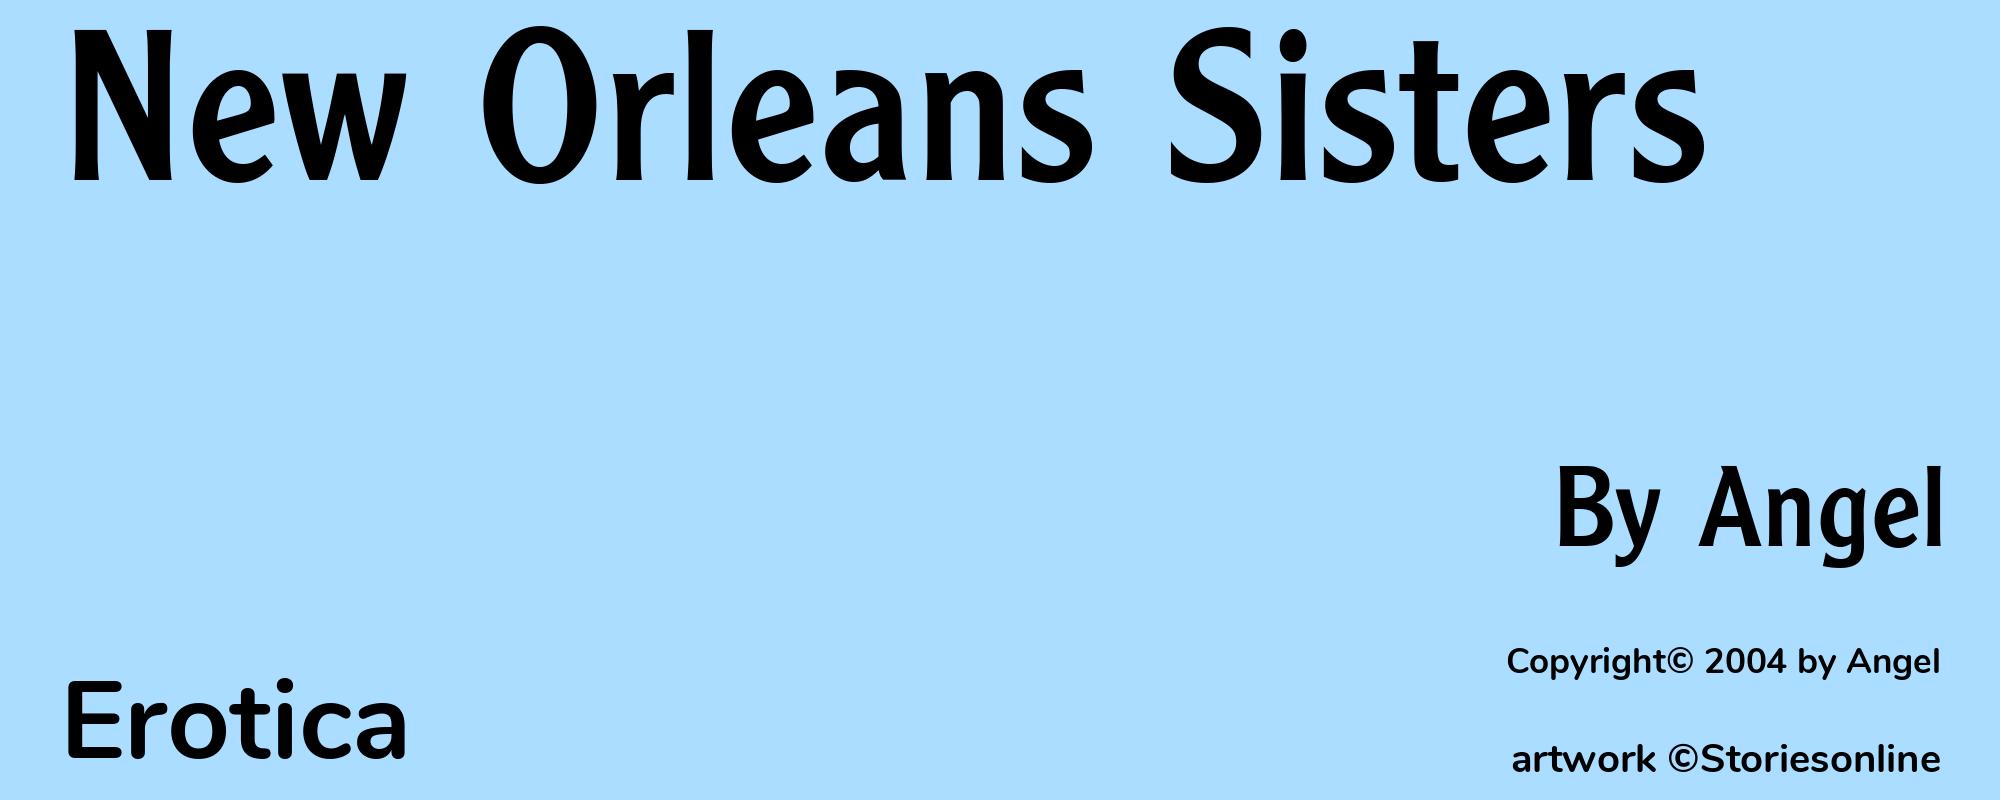 New Orleans Sisters - Cover